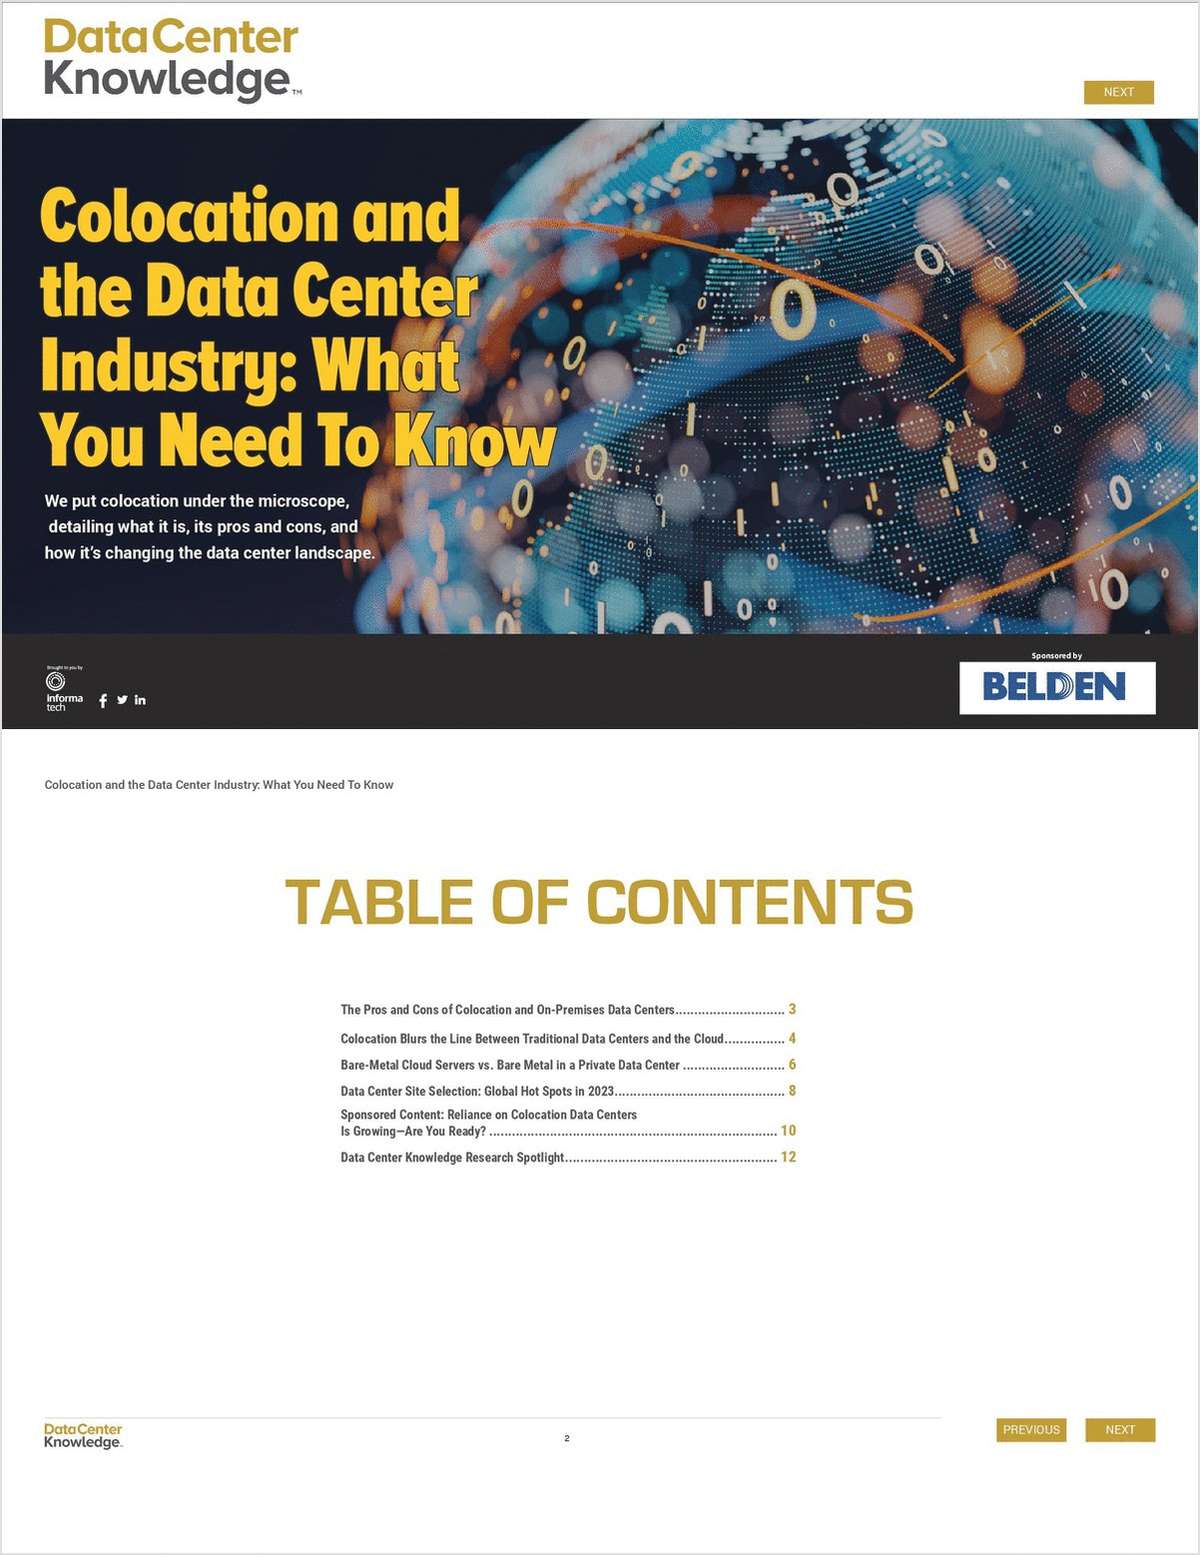 Colocation and the Data Center Industry: What You Need To Know